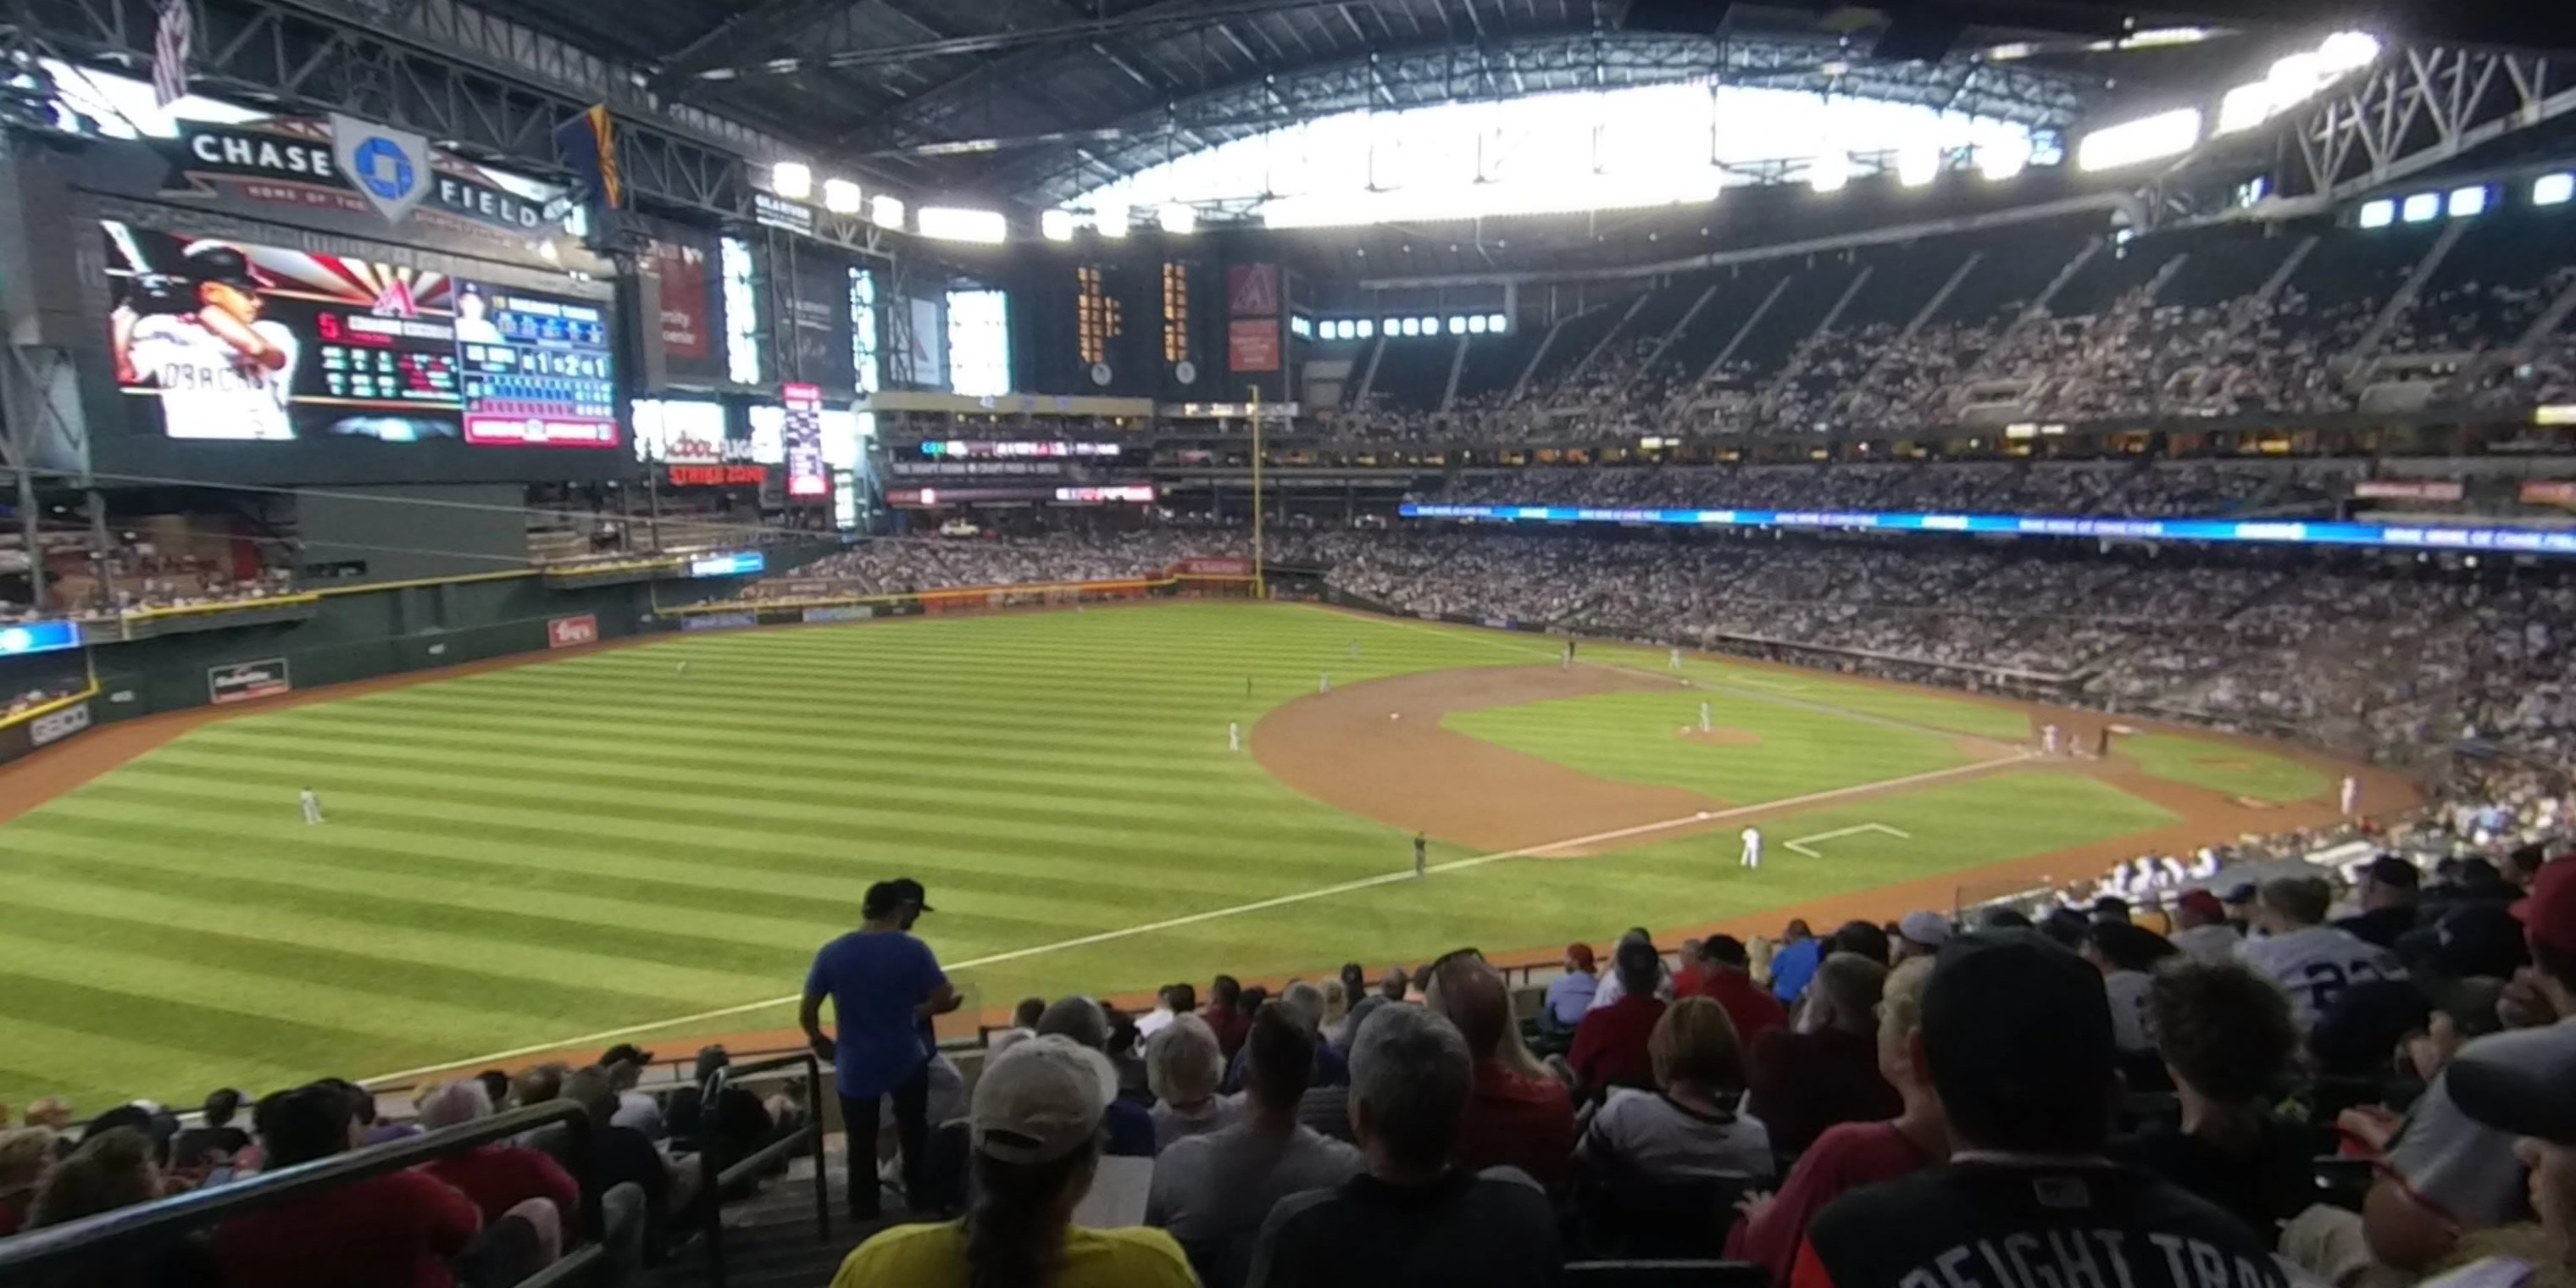 section 216 panoramic seat view  for baseball - chase field